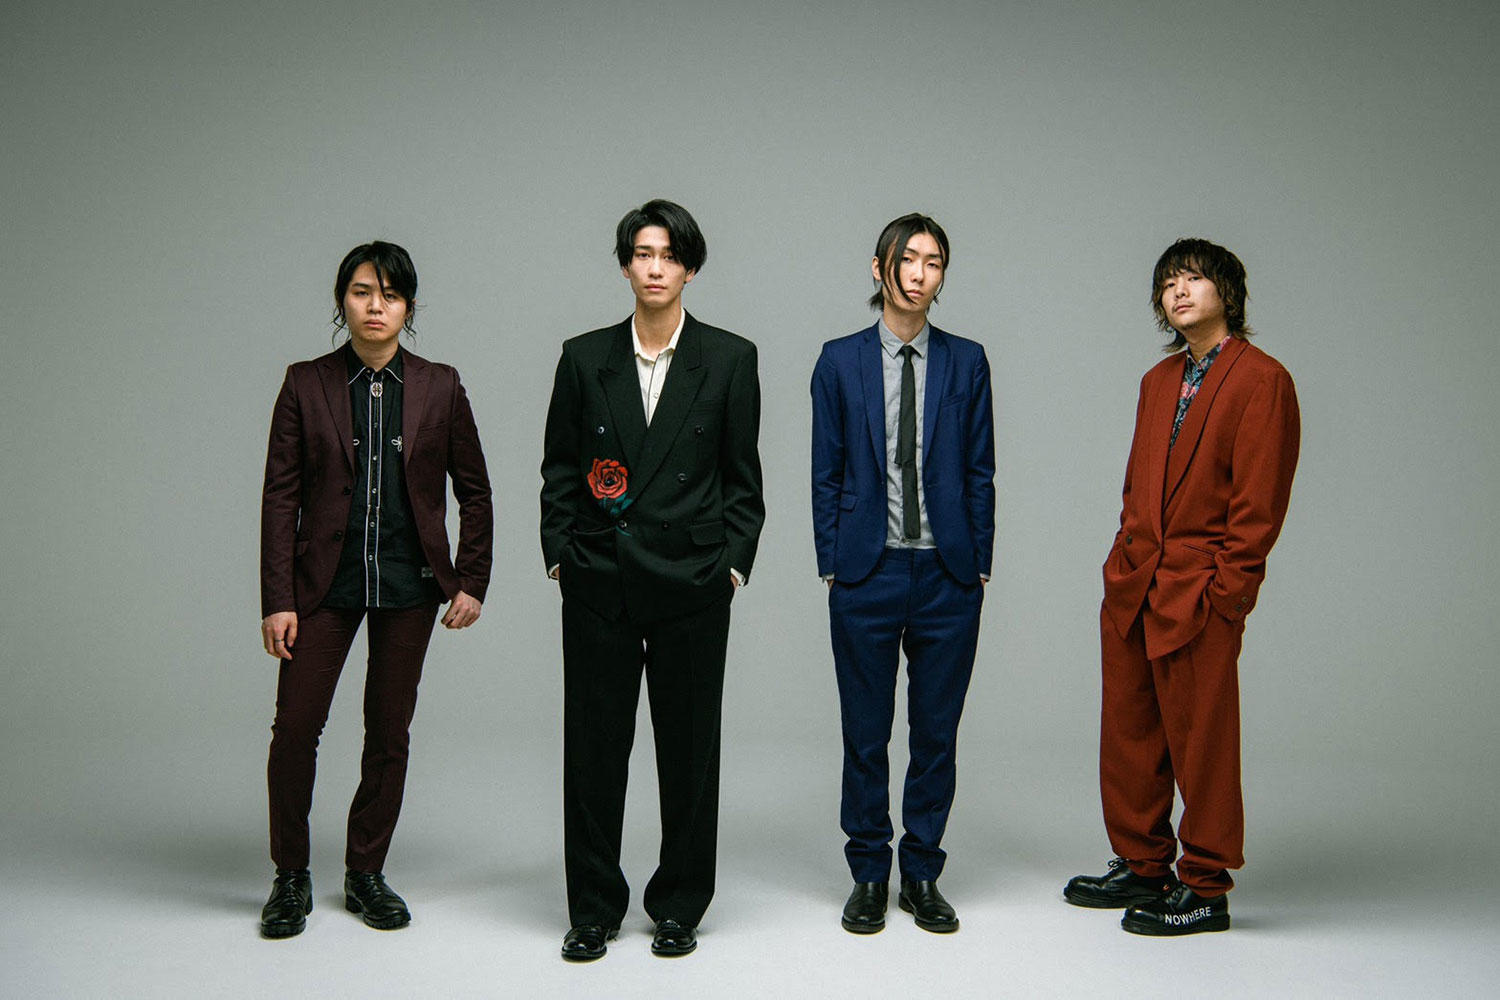 Ivy to Fraudulent Game、3月東名阪2マンツアーゲスト解禁＆盟友Halo at 四畳半との活休前最後の2マンを配信！